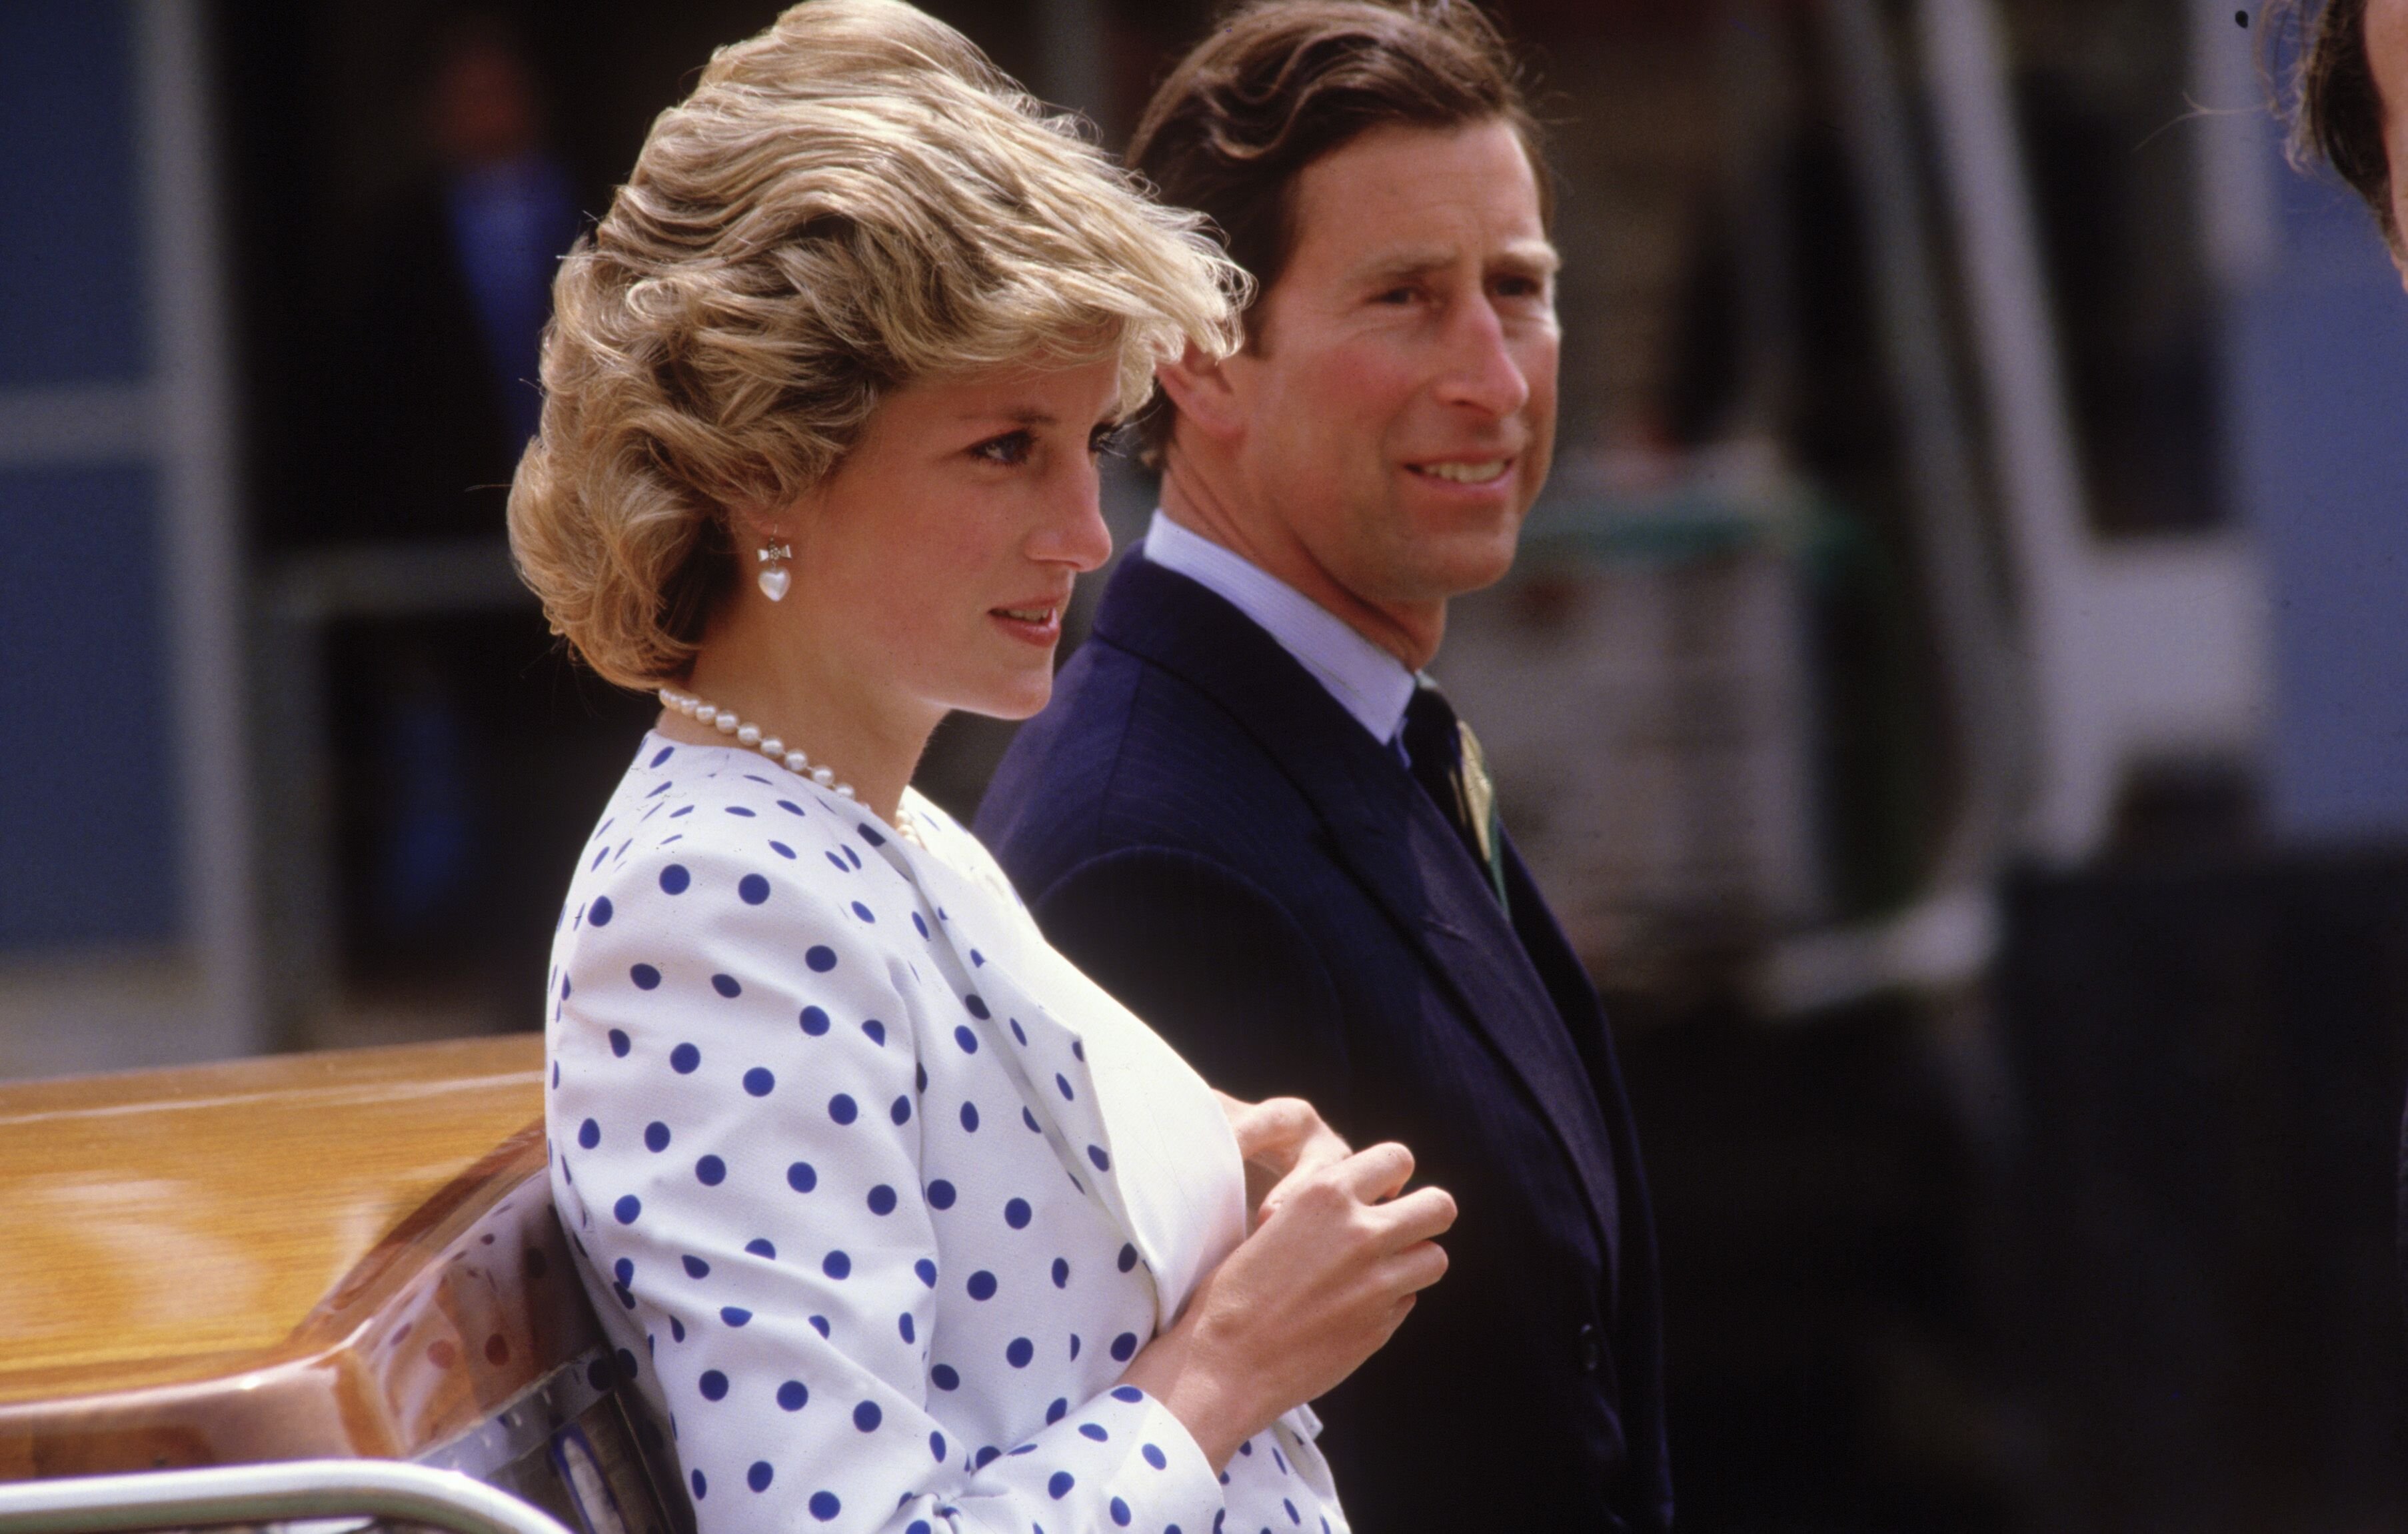 Princess Diana and Prince Charles in Italy. | Source: Getty Images